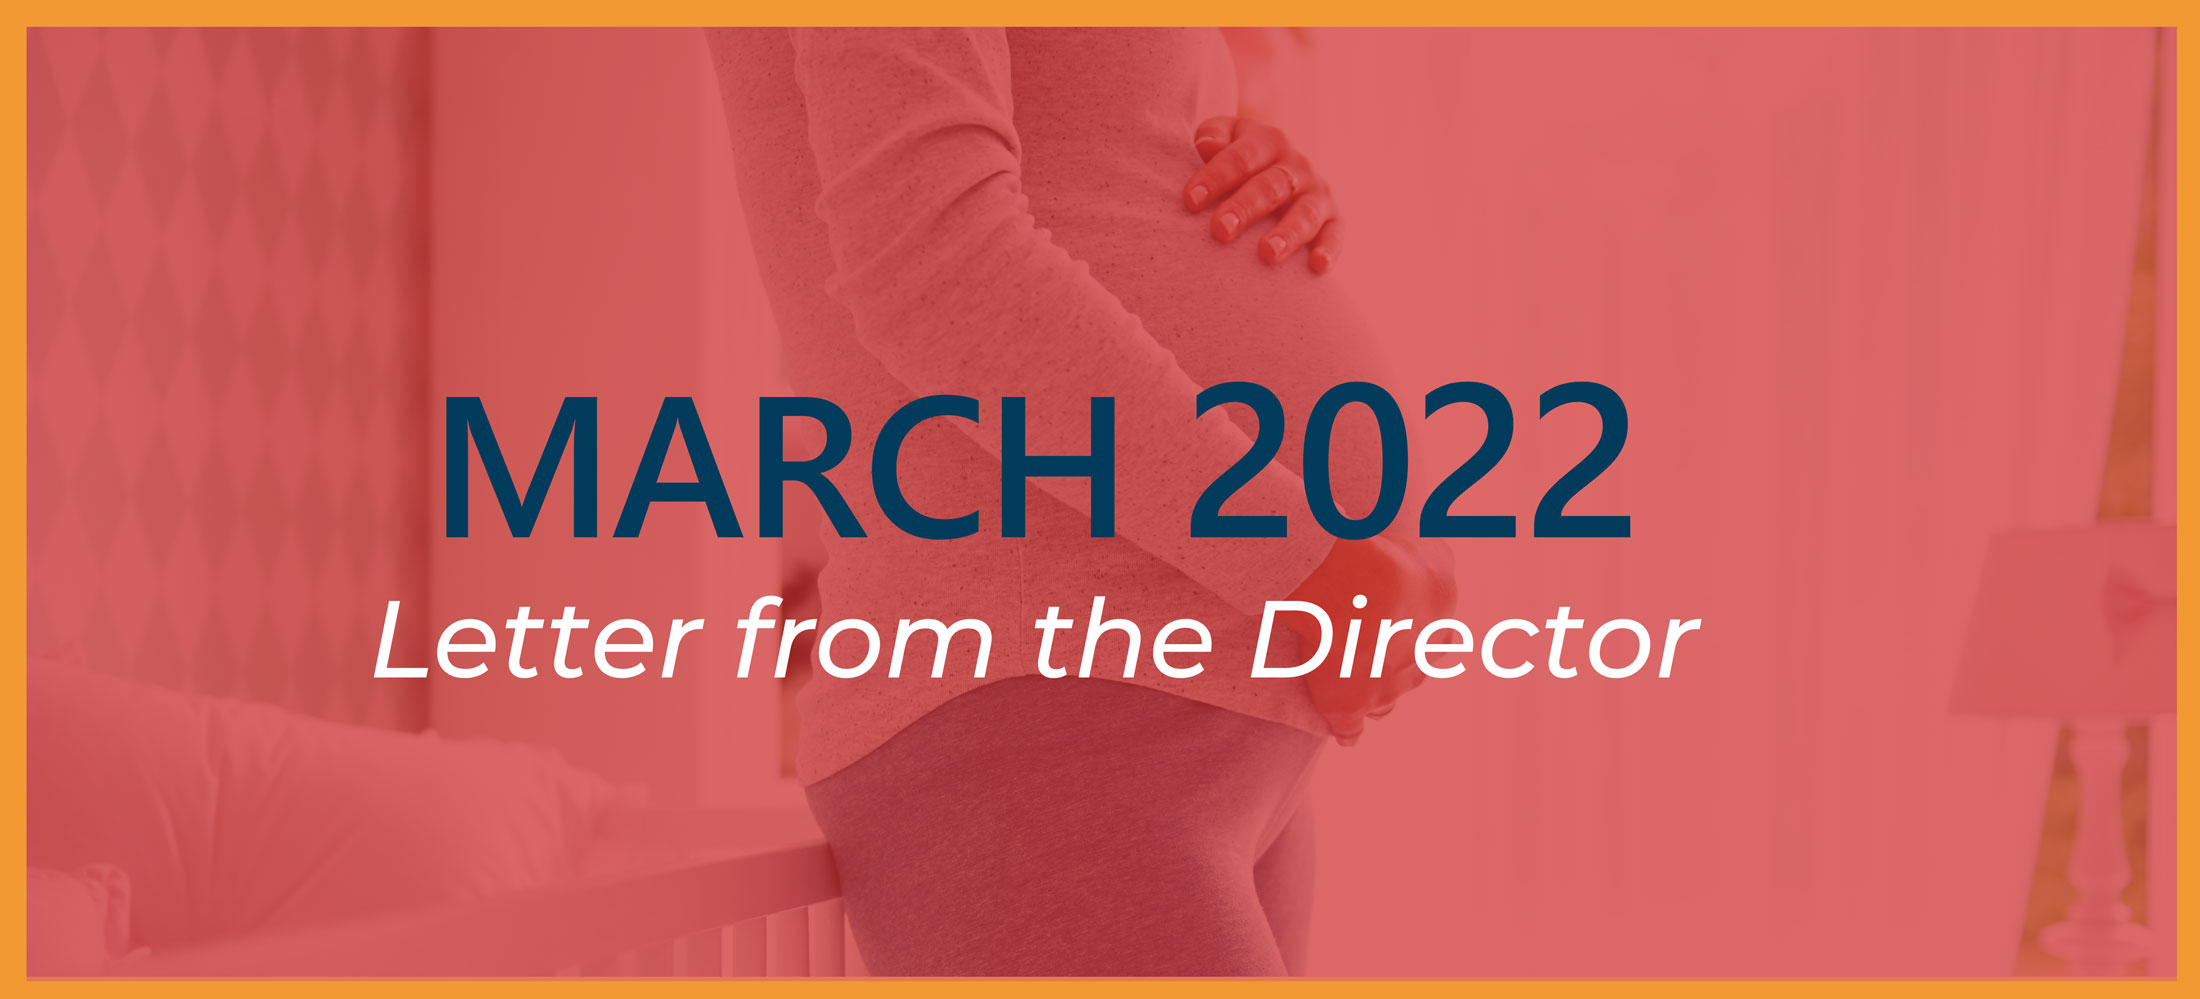 March 2022 - Letter from the Director